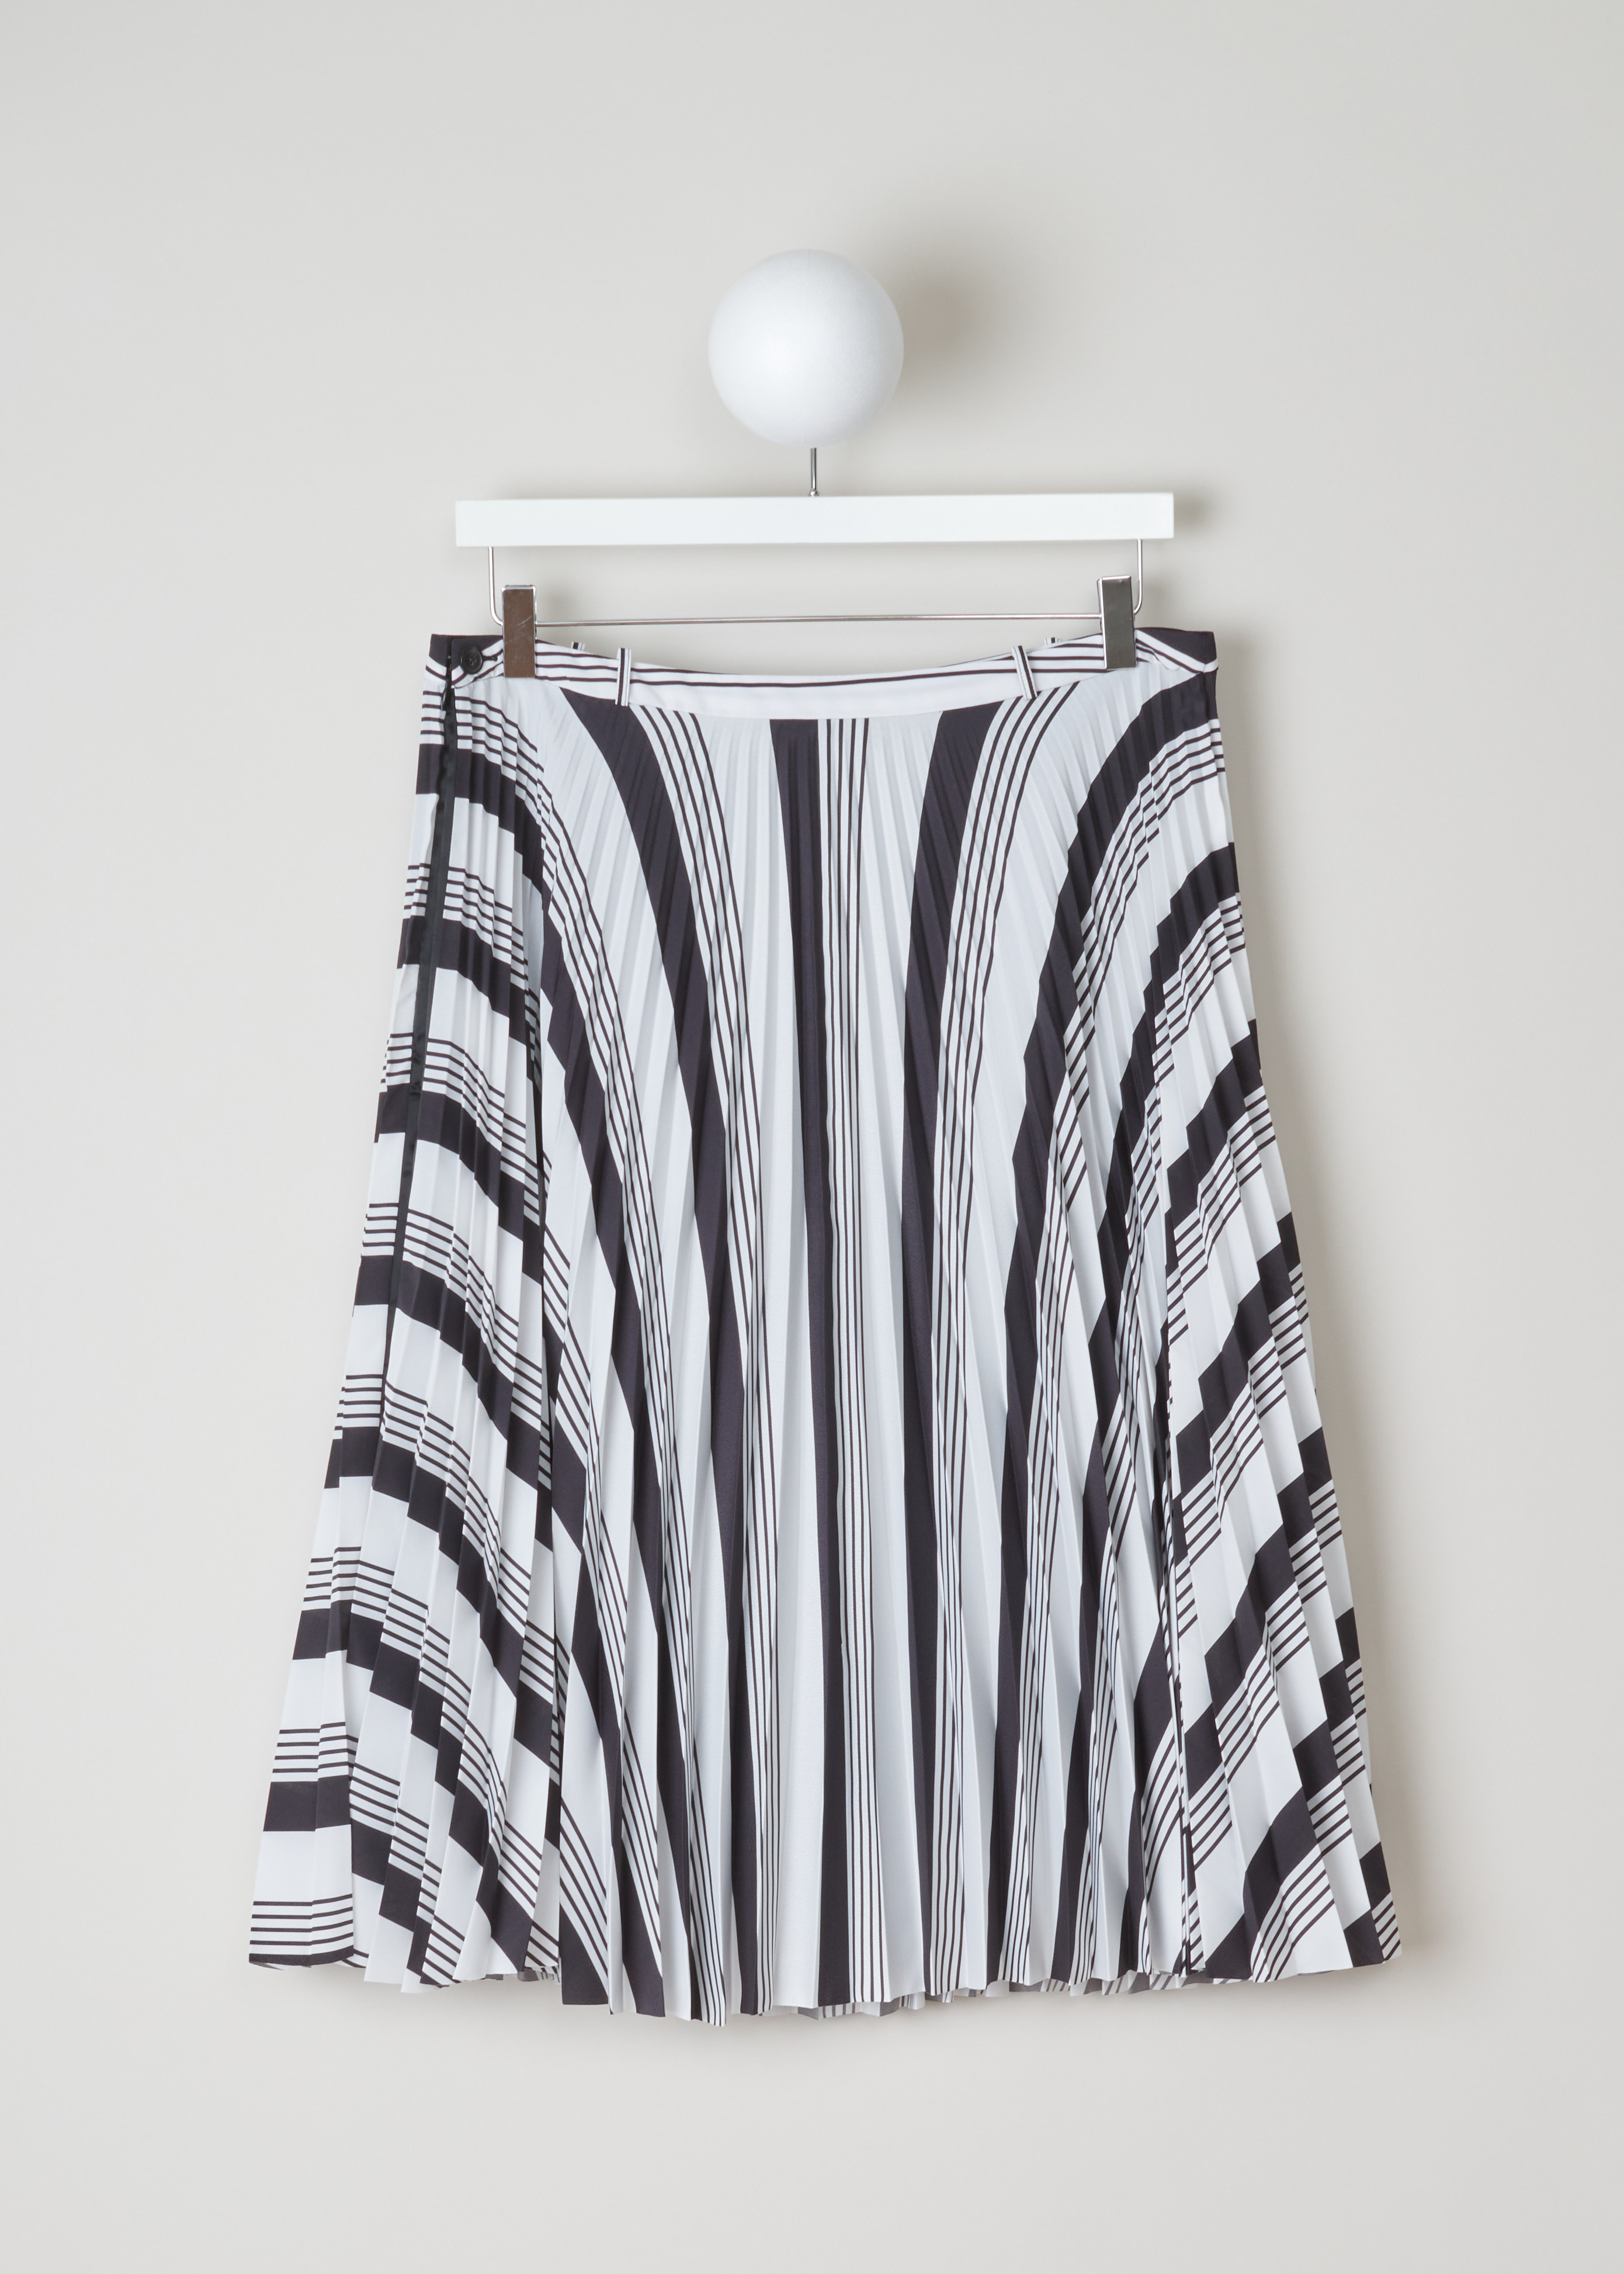 Balenciaga Striped pleated skirt 501971_TYA43_1070 noir blanc back. White plissé skirt with curved black stripe pattern, small waistband with four belt hoops, invisible zipper and slit on the side.